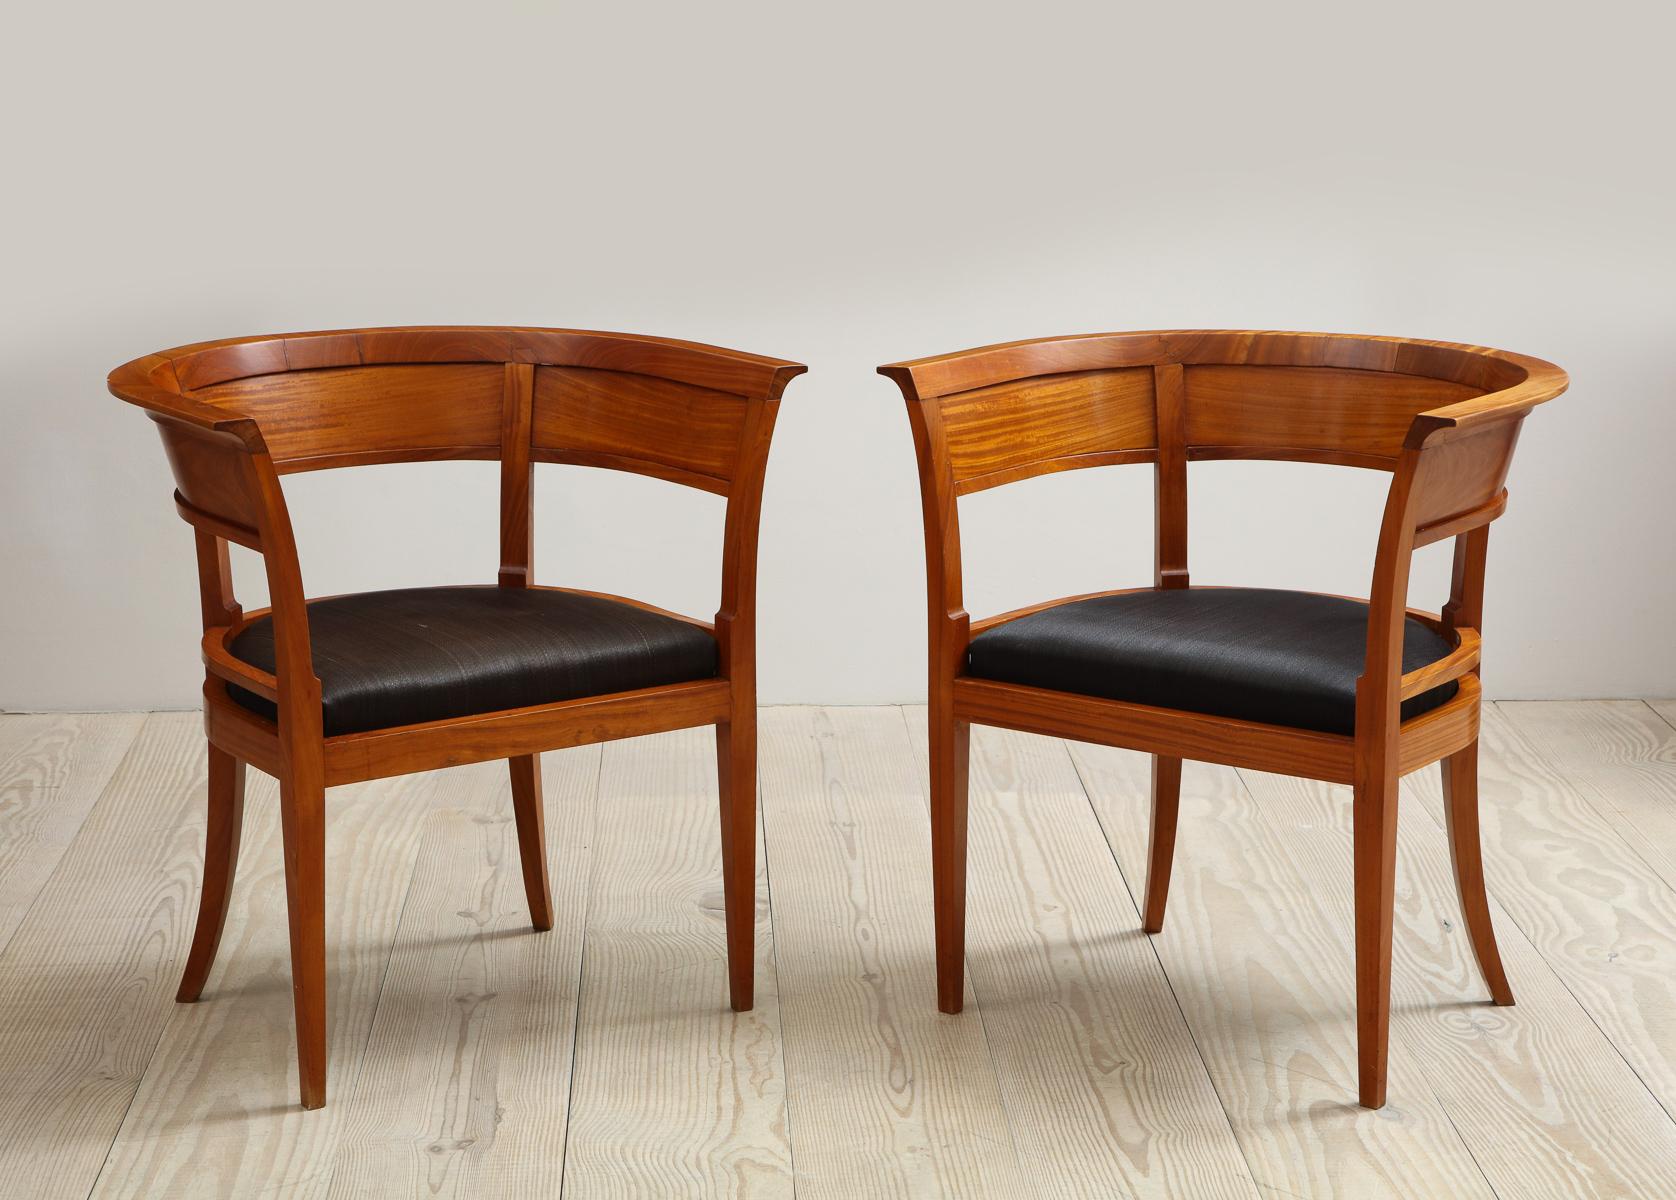 Kaare Klint, Rare Armchairs with Back Wood Panels, 1916 3